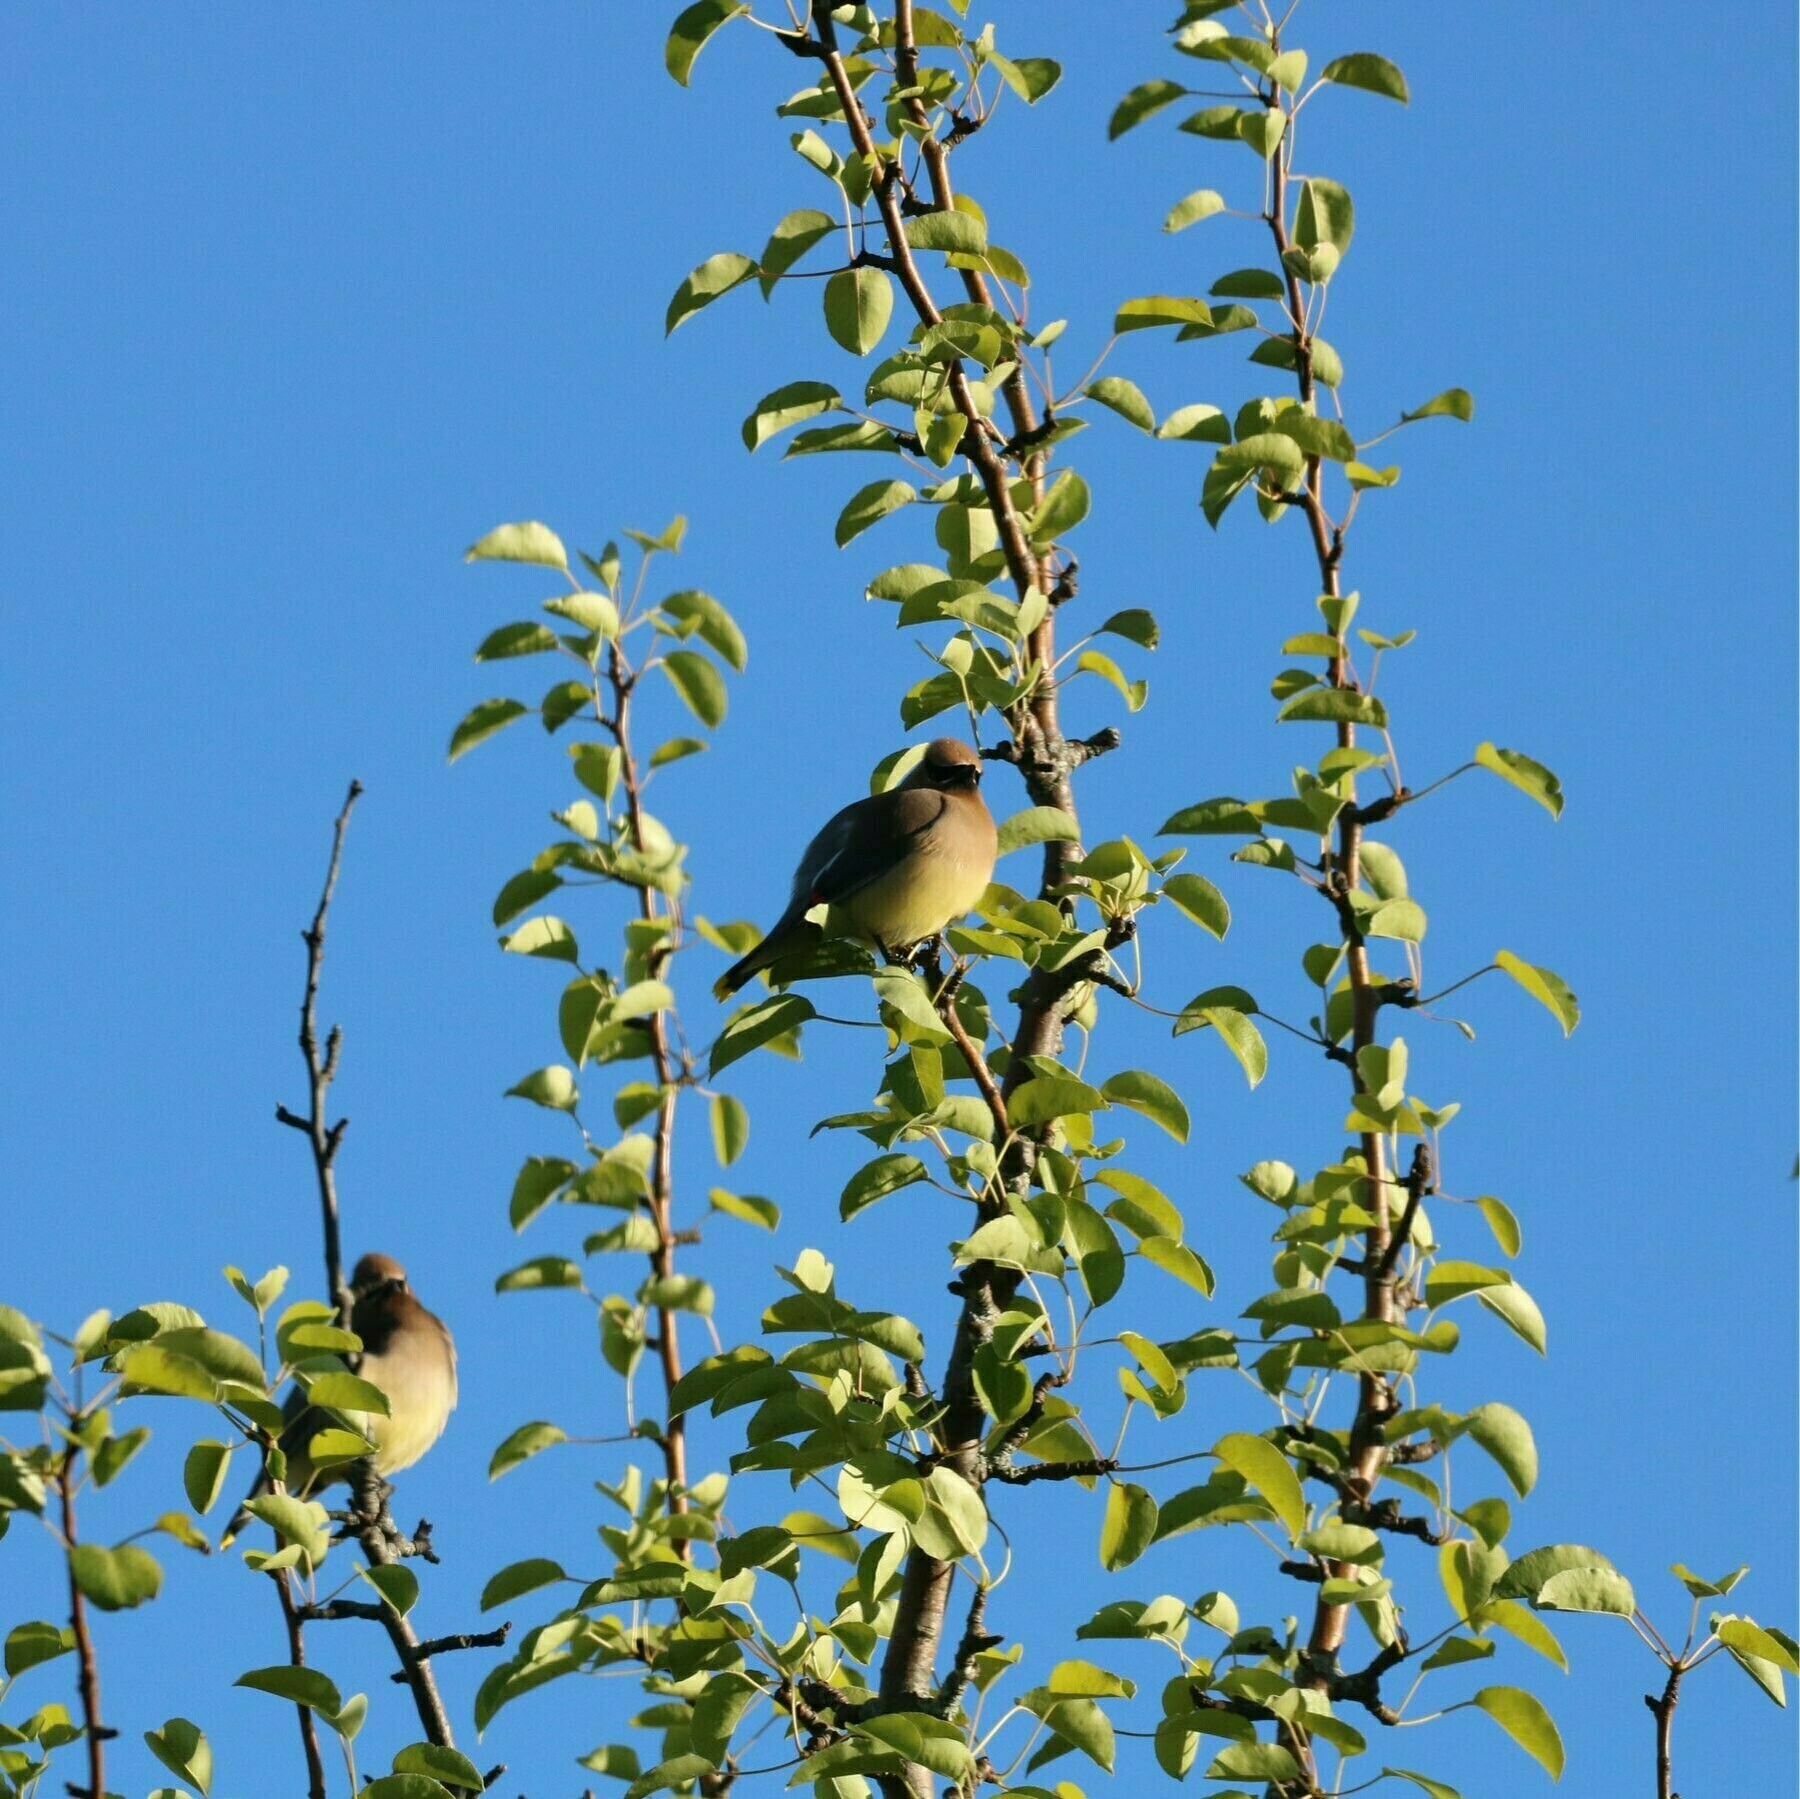 two cedar waxwings sitting on branches at the top of a fruit tree